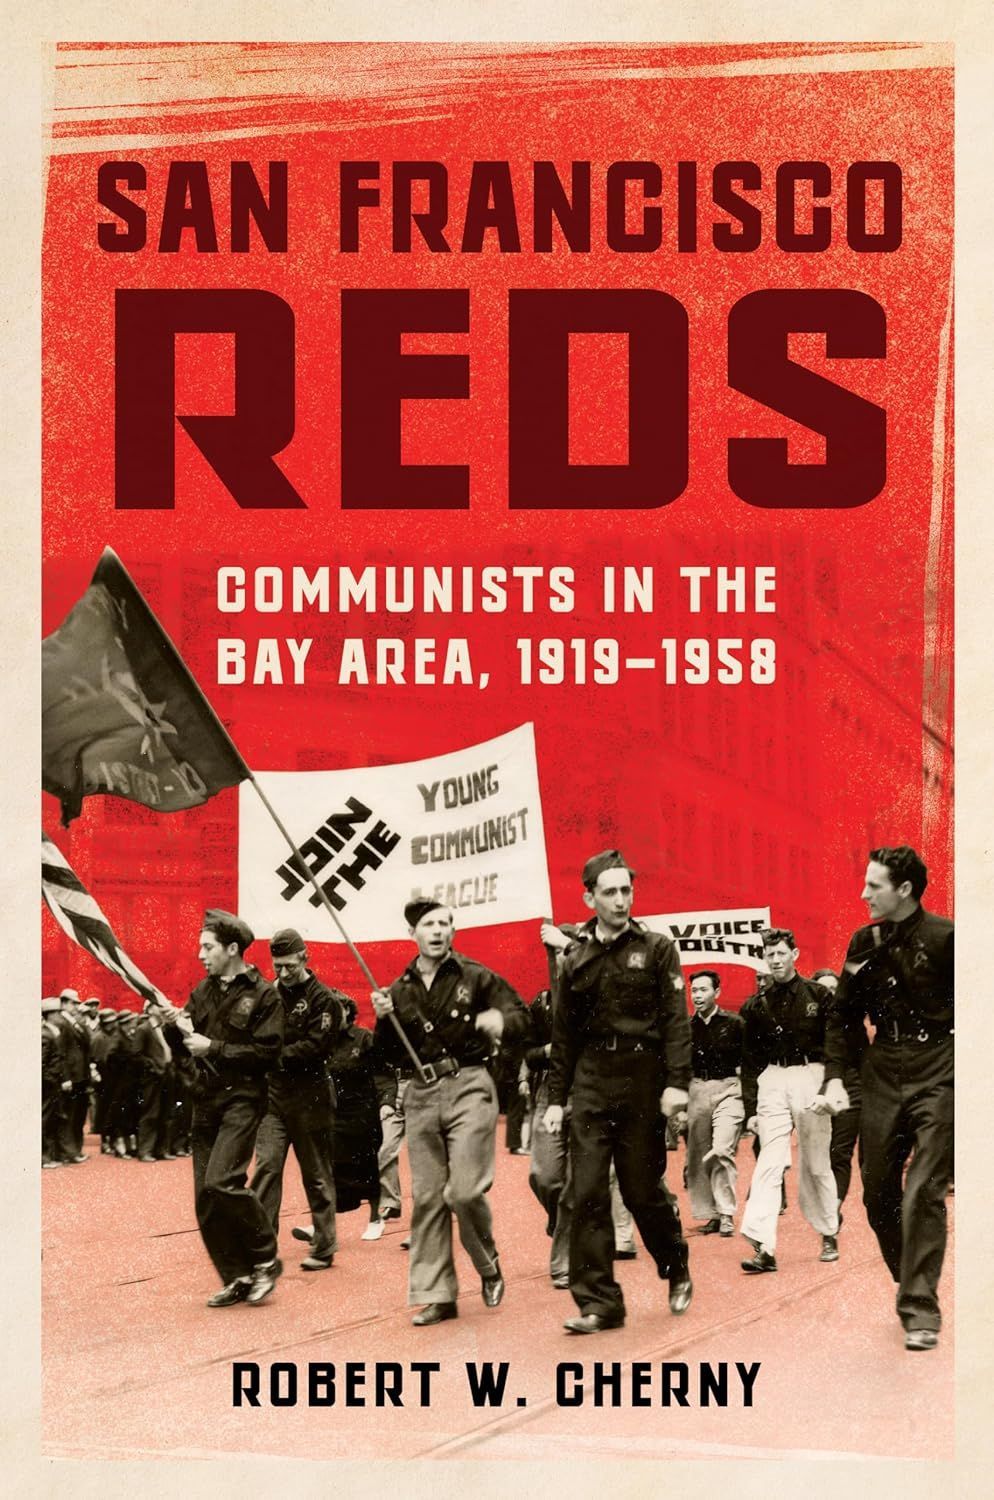 California Communism and Its Afterlives: On Robert W. Cherny’s “San Francisco Reds”